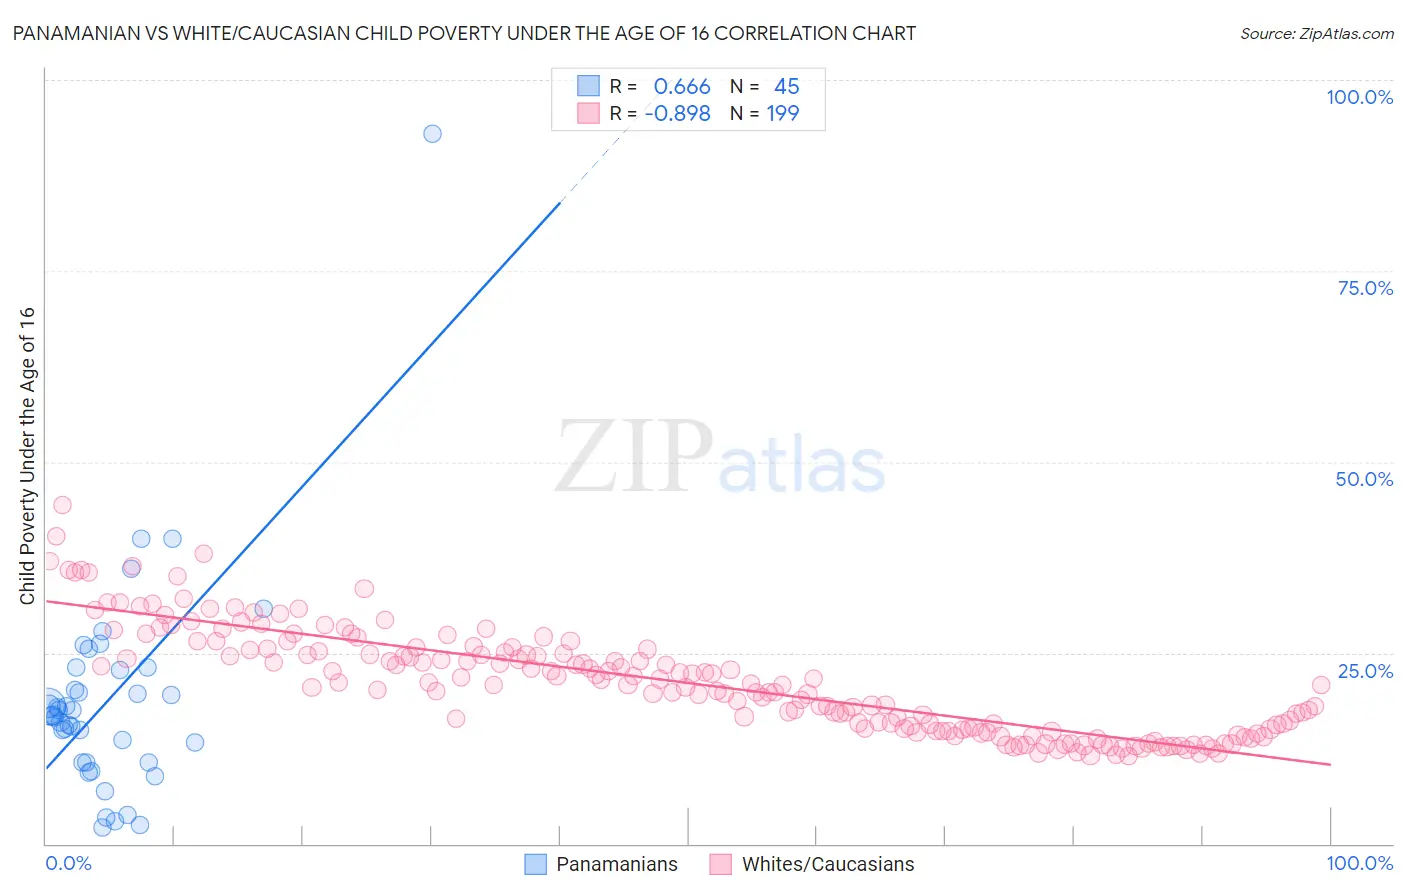 Panamanian vs White/Caucasian Child Poverty Under the Age of 16